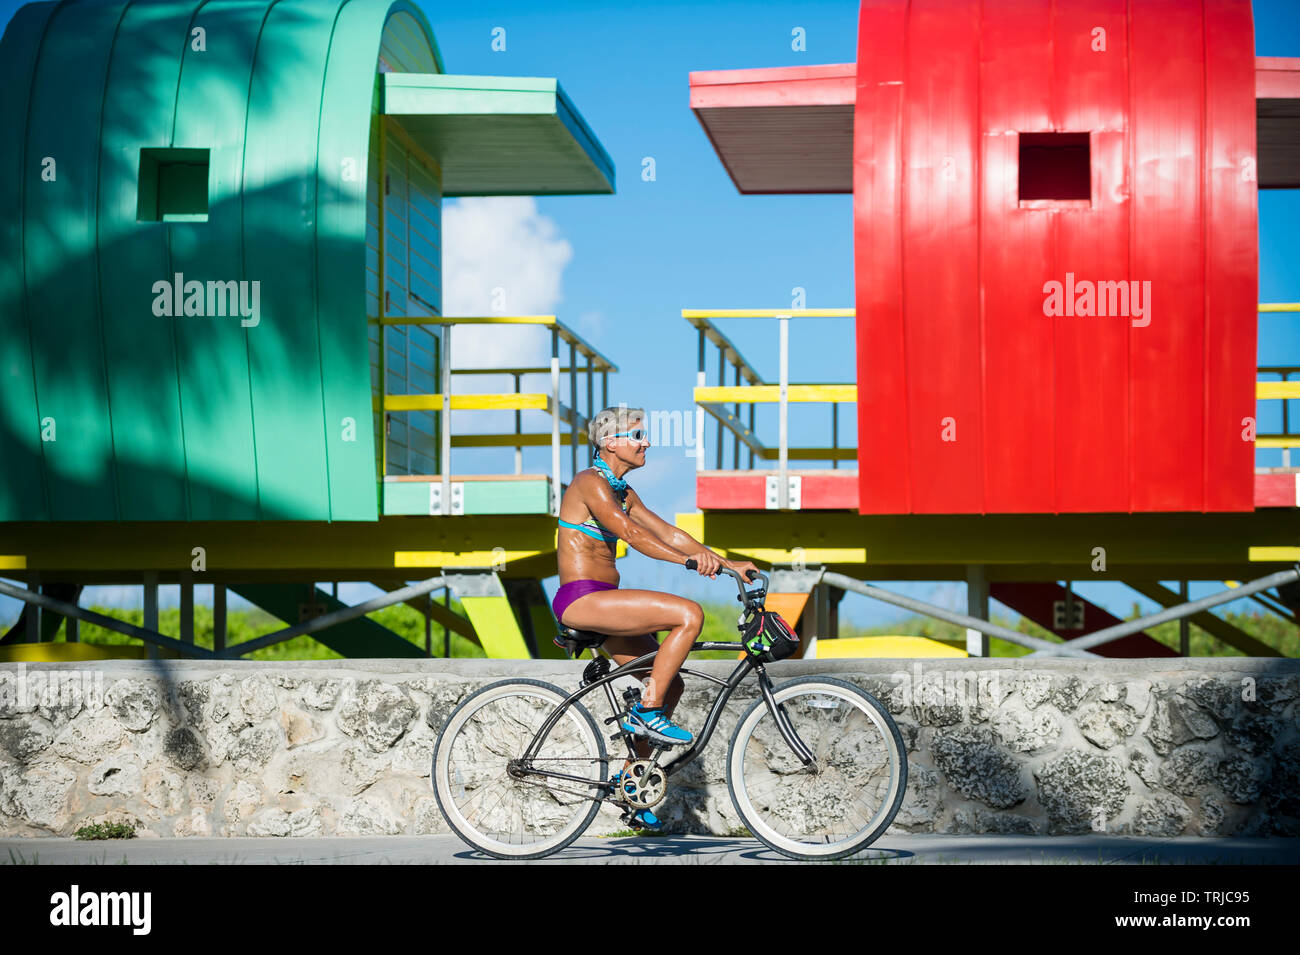 MIAMI - SEPTEMBER, 2018: A mature woman rides a bicycle past a row of brightly colored lifeguard towers awaiting placement on South Beach. Stock Photo